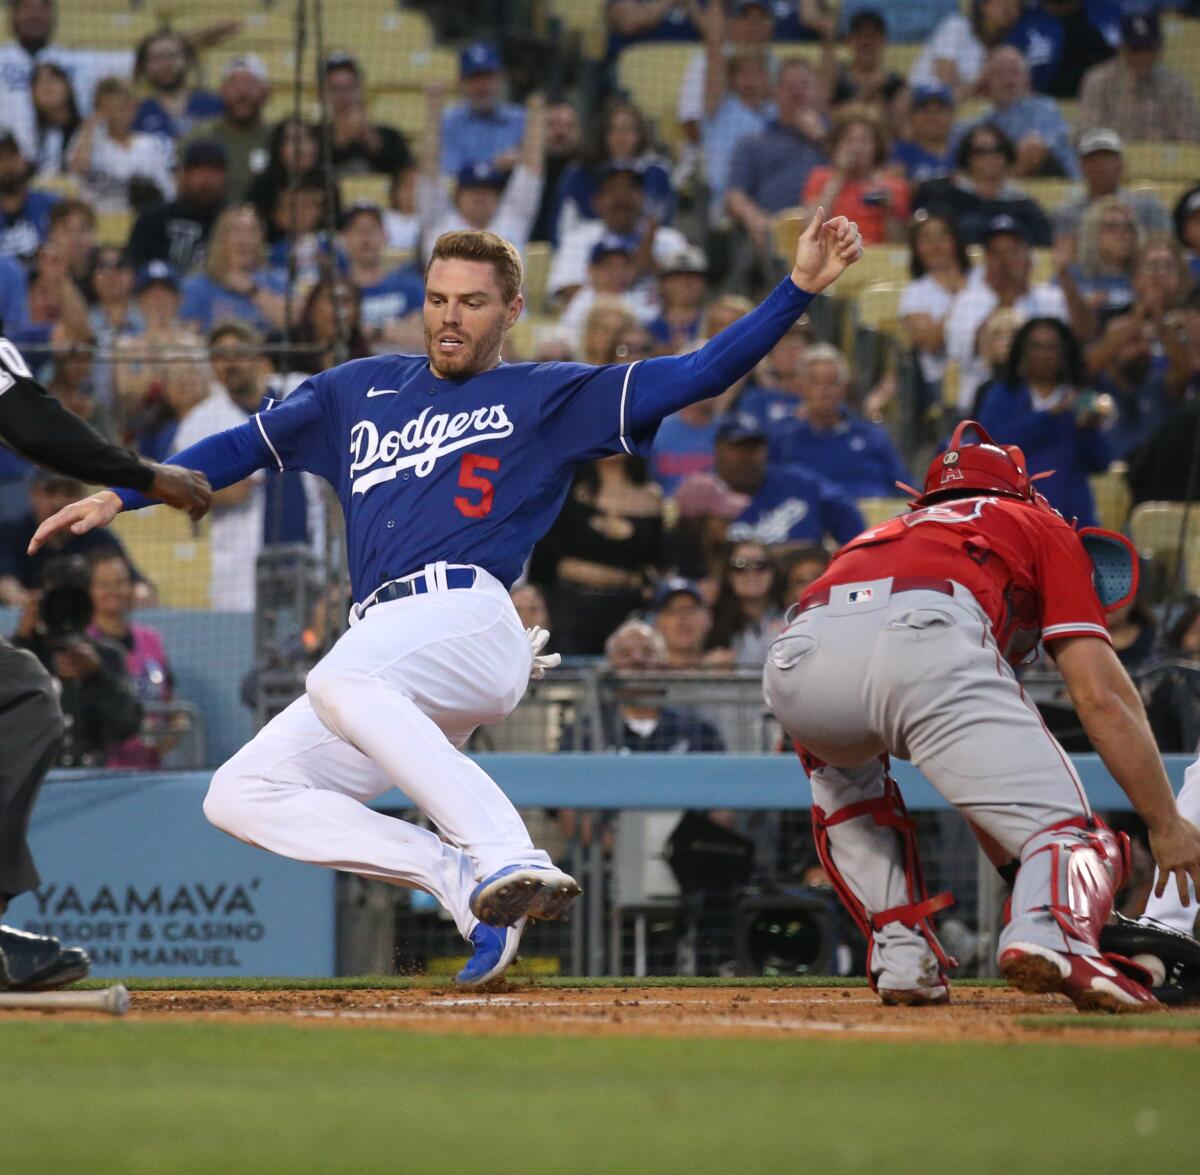 Dodgers' Freddie Freeman scores on a Max Muncy double in the third inning against the Angels during a spring training game.